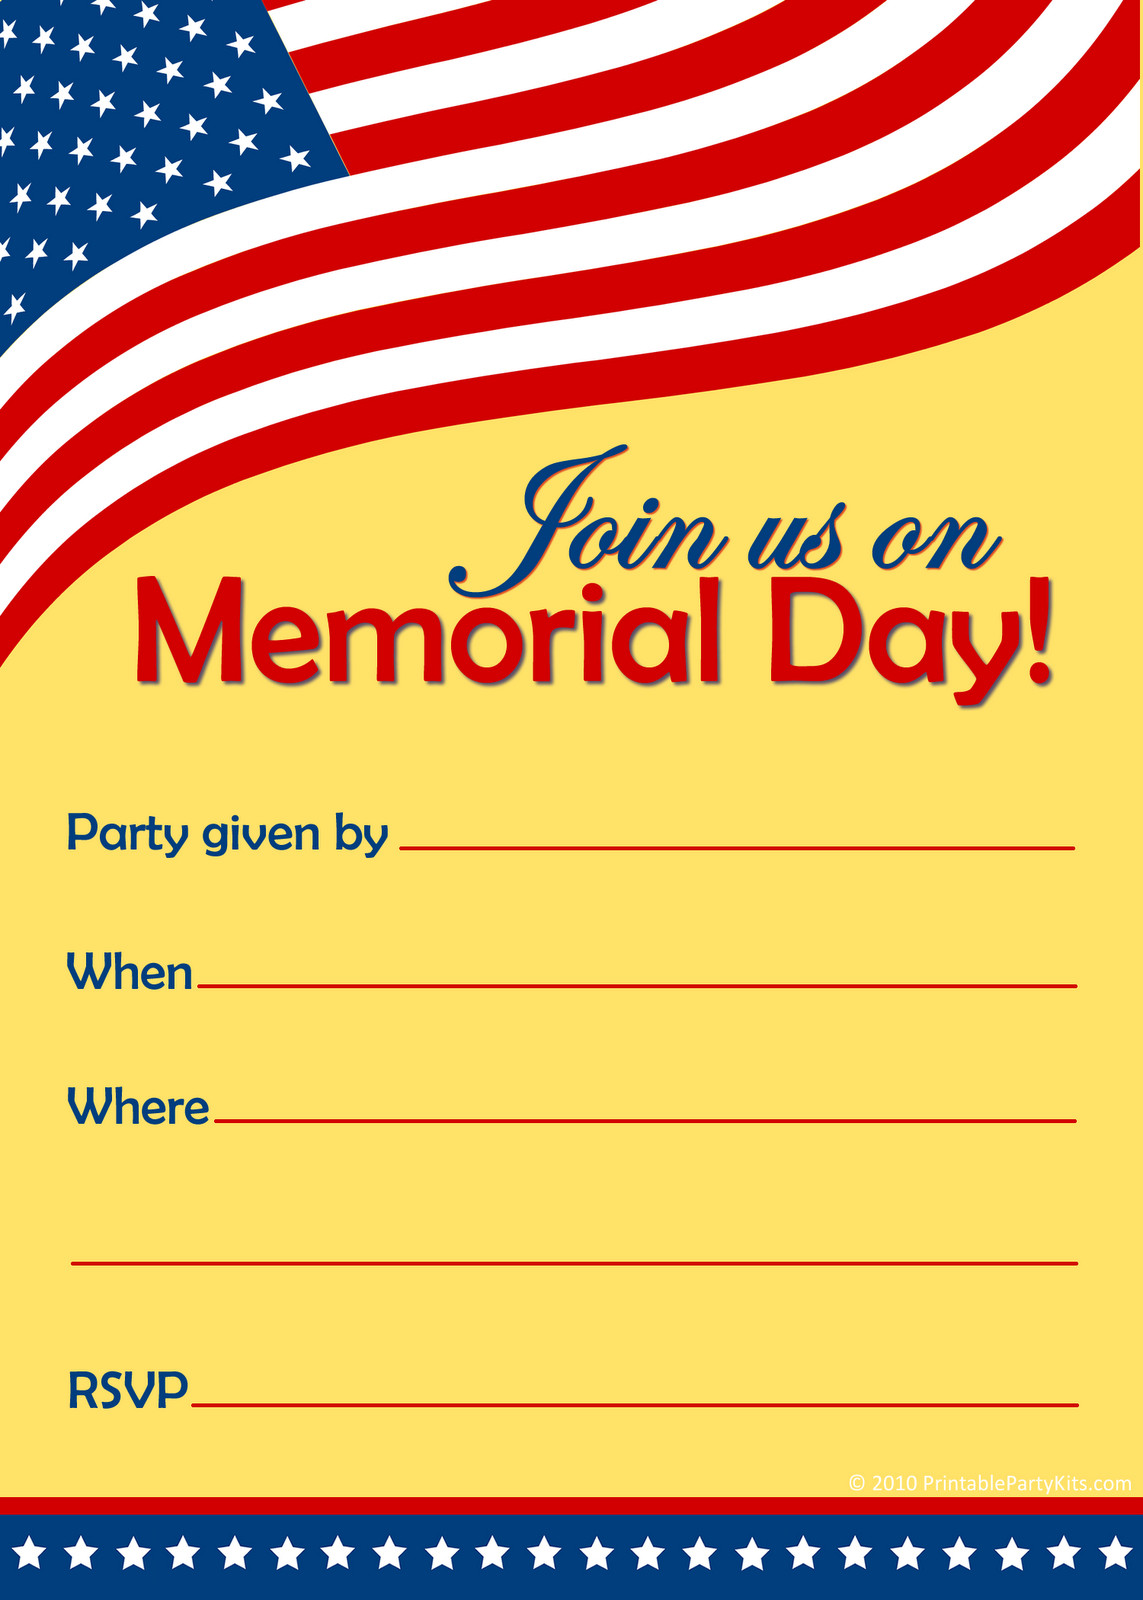 Memorial Day Party Invitation
 Free Printable Party Invitations Free Invitations for a